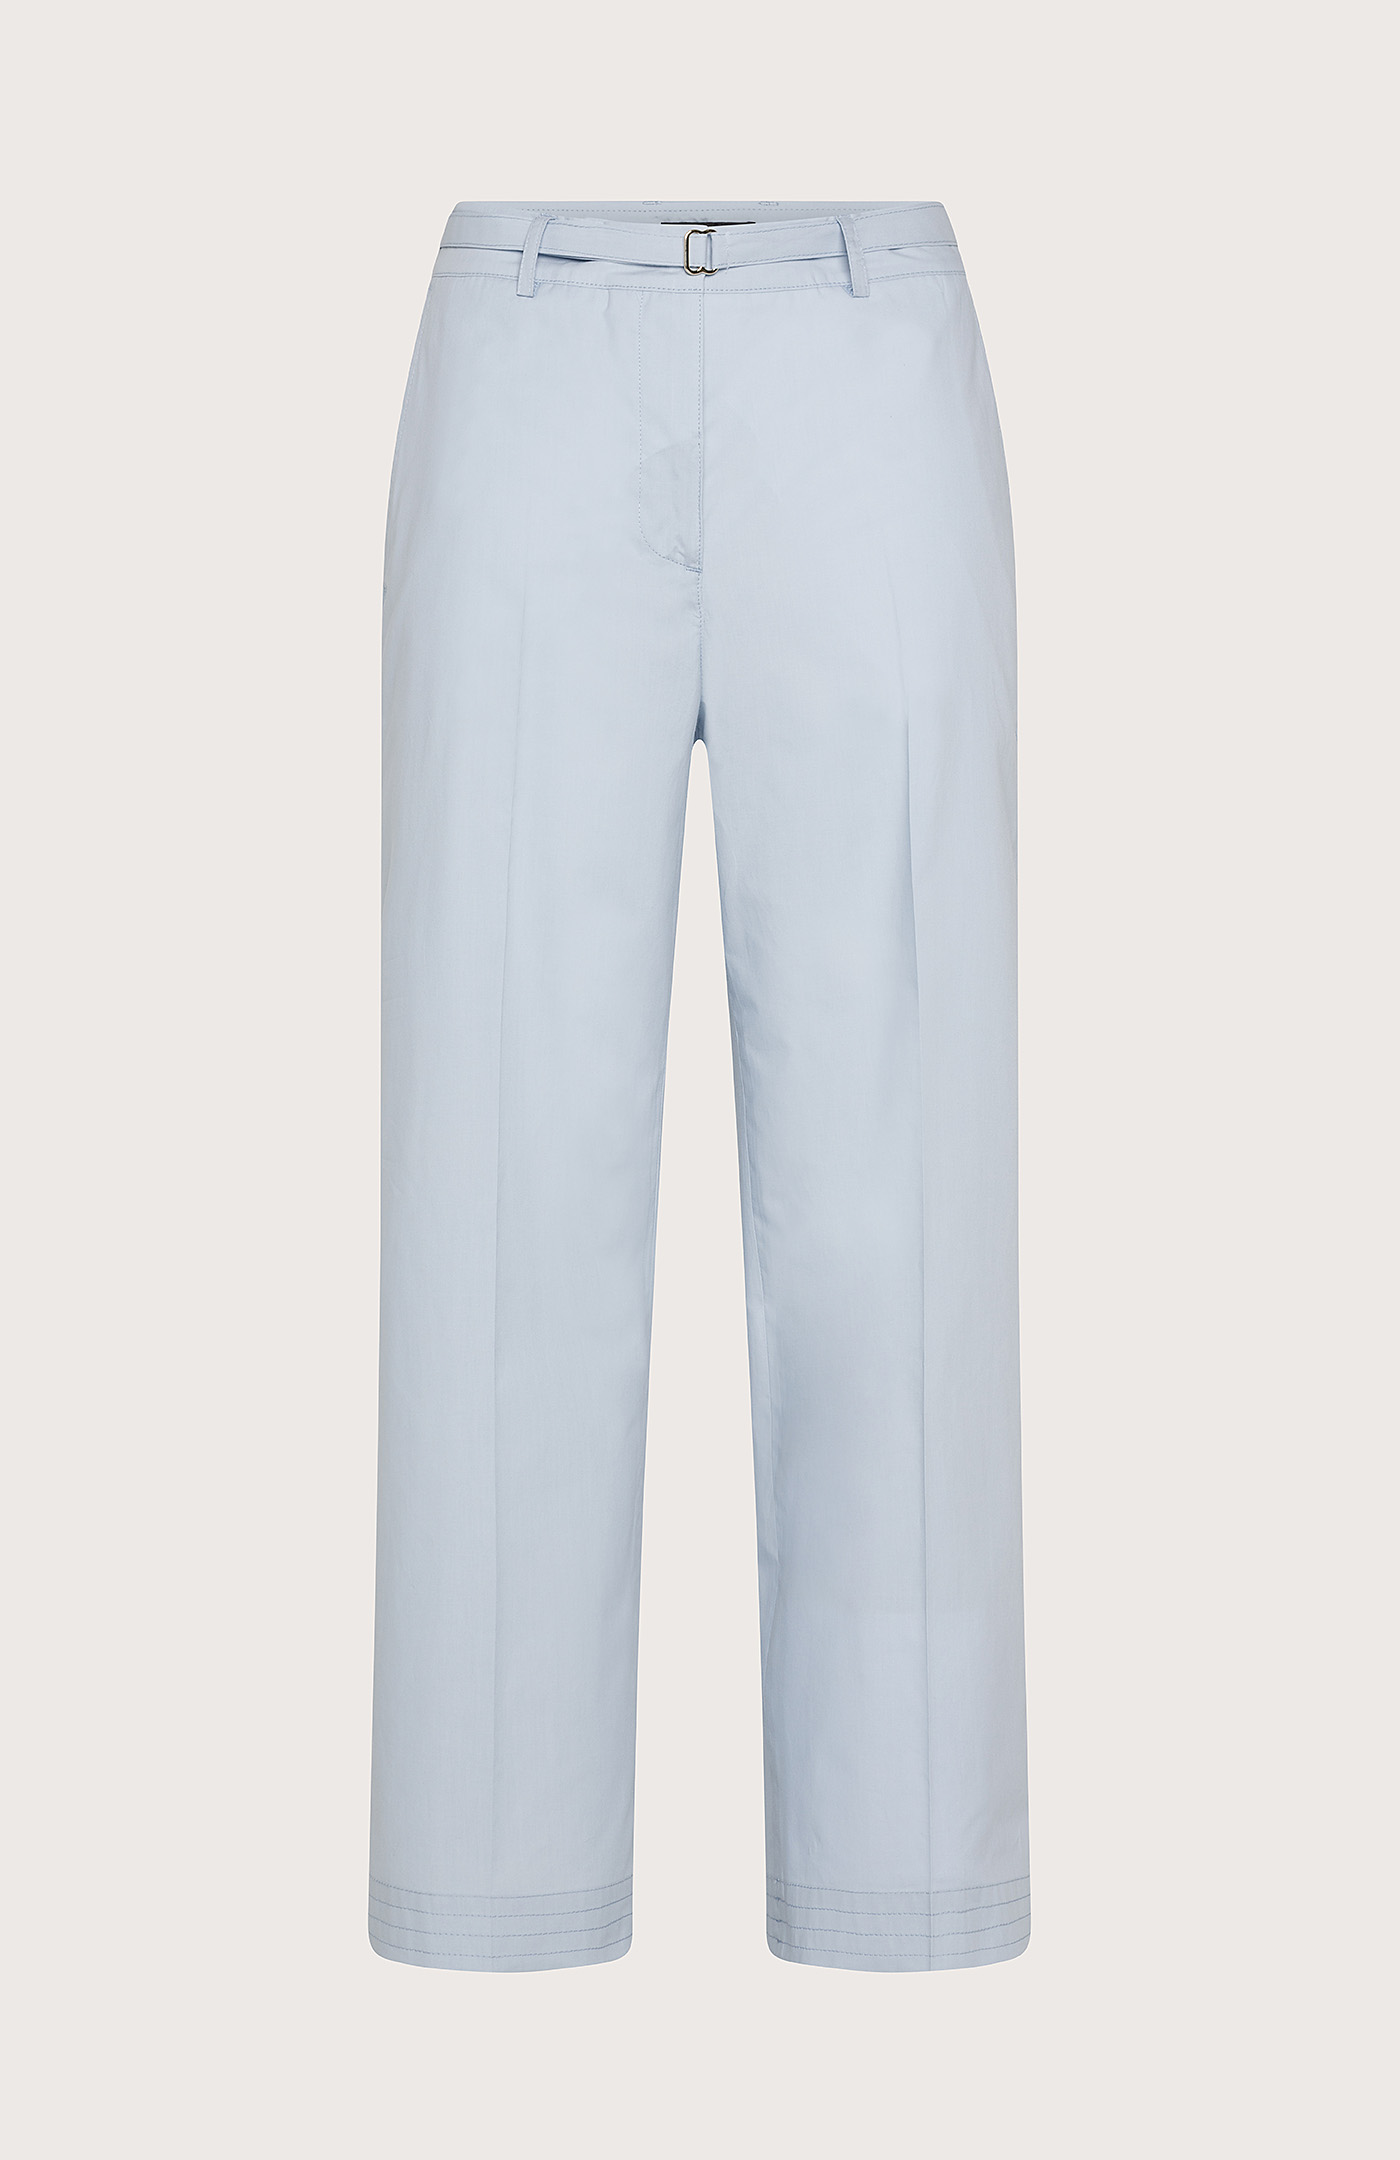 Elisabetta Franchi Belted Flared Trousers in White | Lyst UK